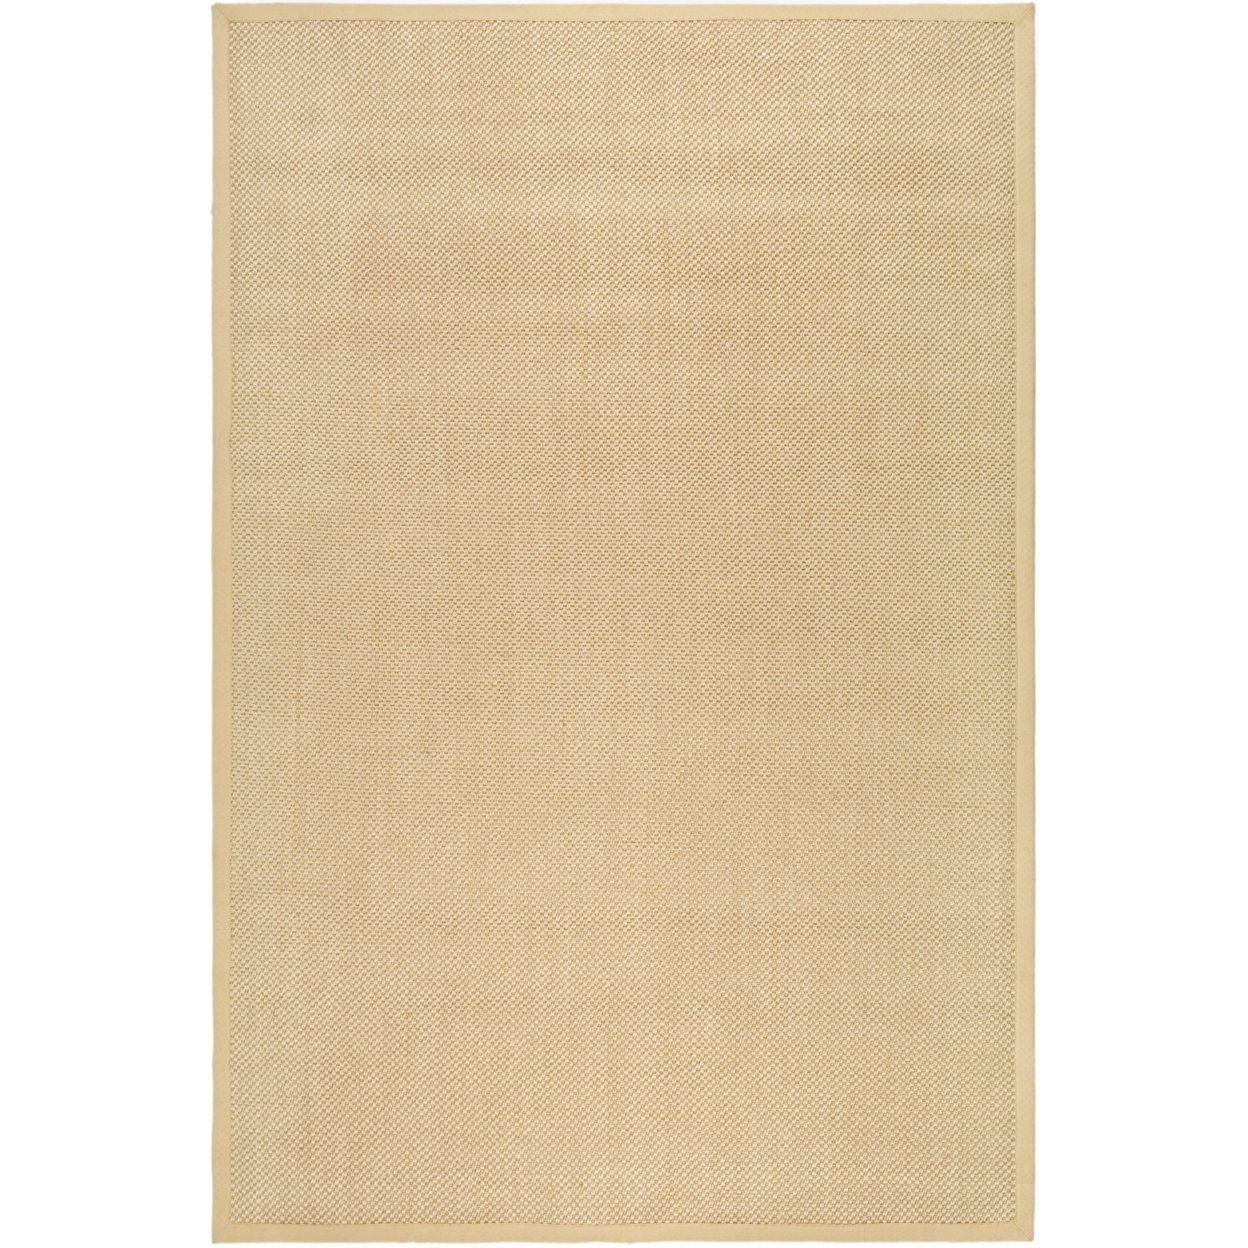 SAFAVIEH Natural Fiber Collection NF443A Maize/Wheat Rug - 5' X 8'